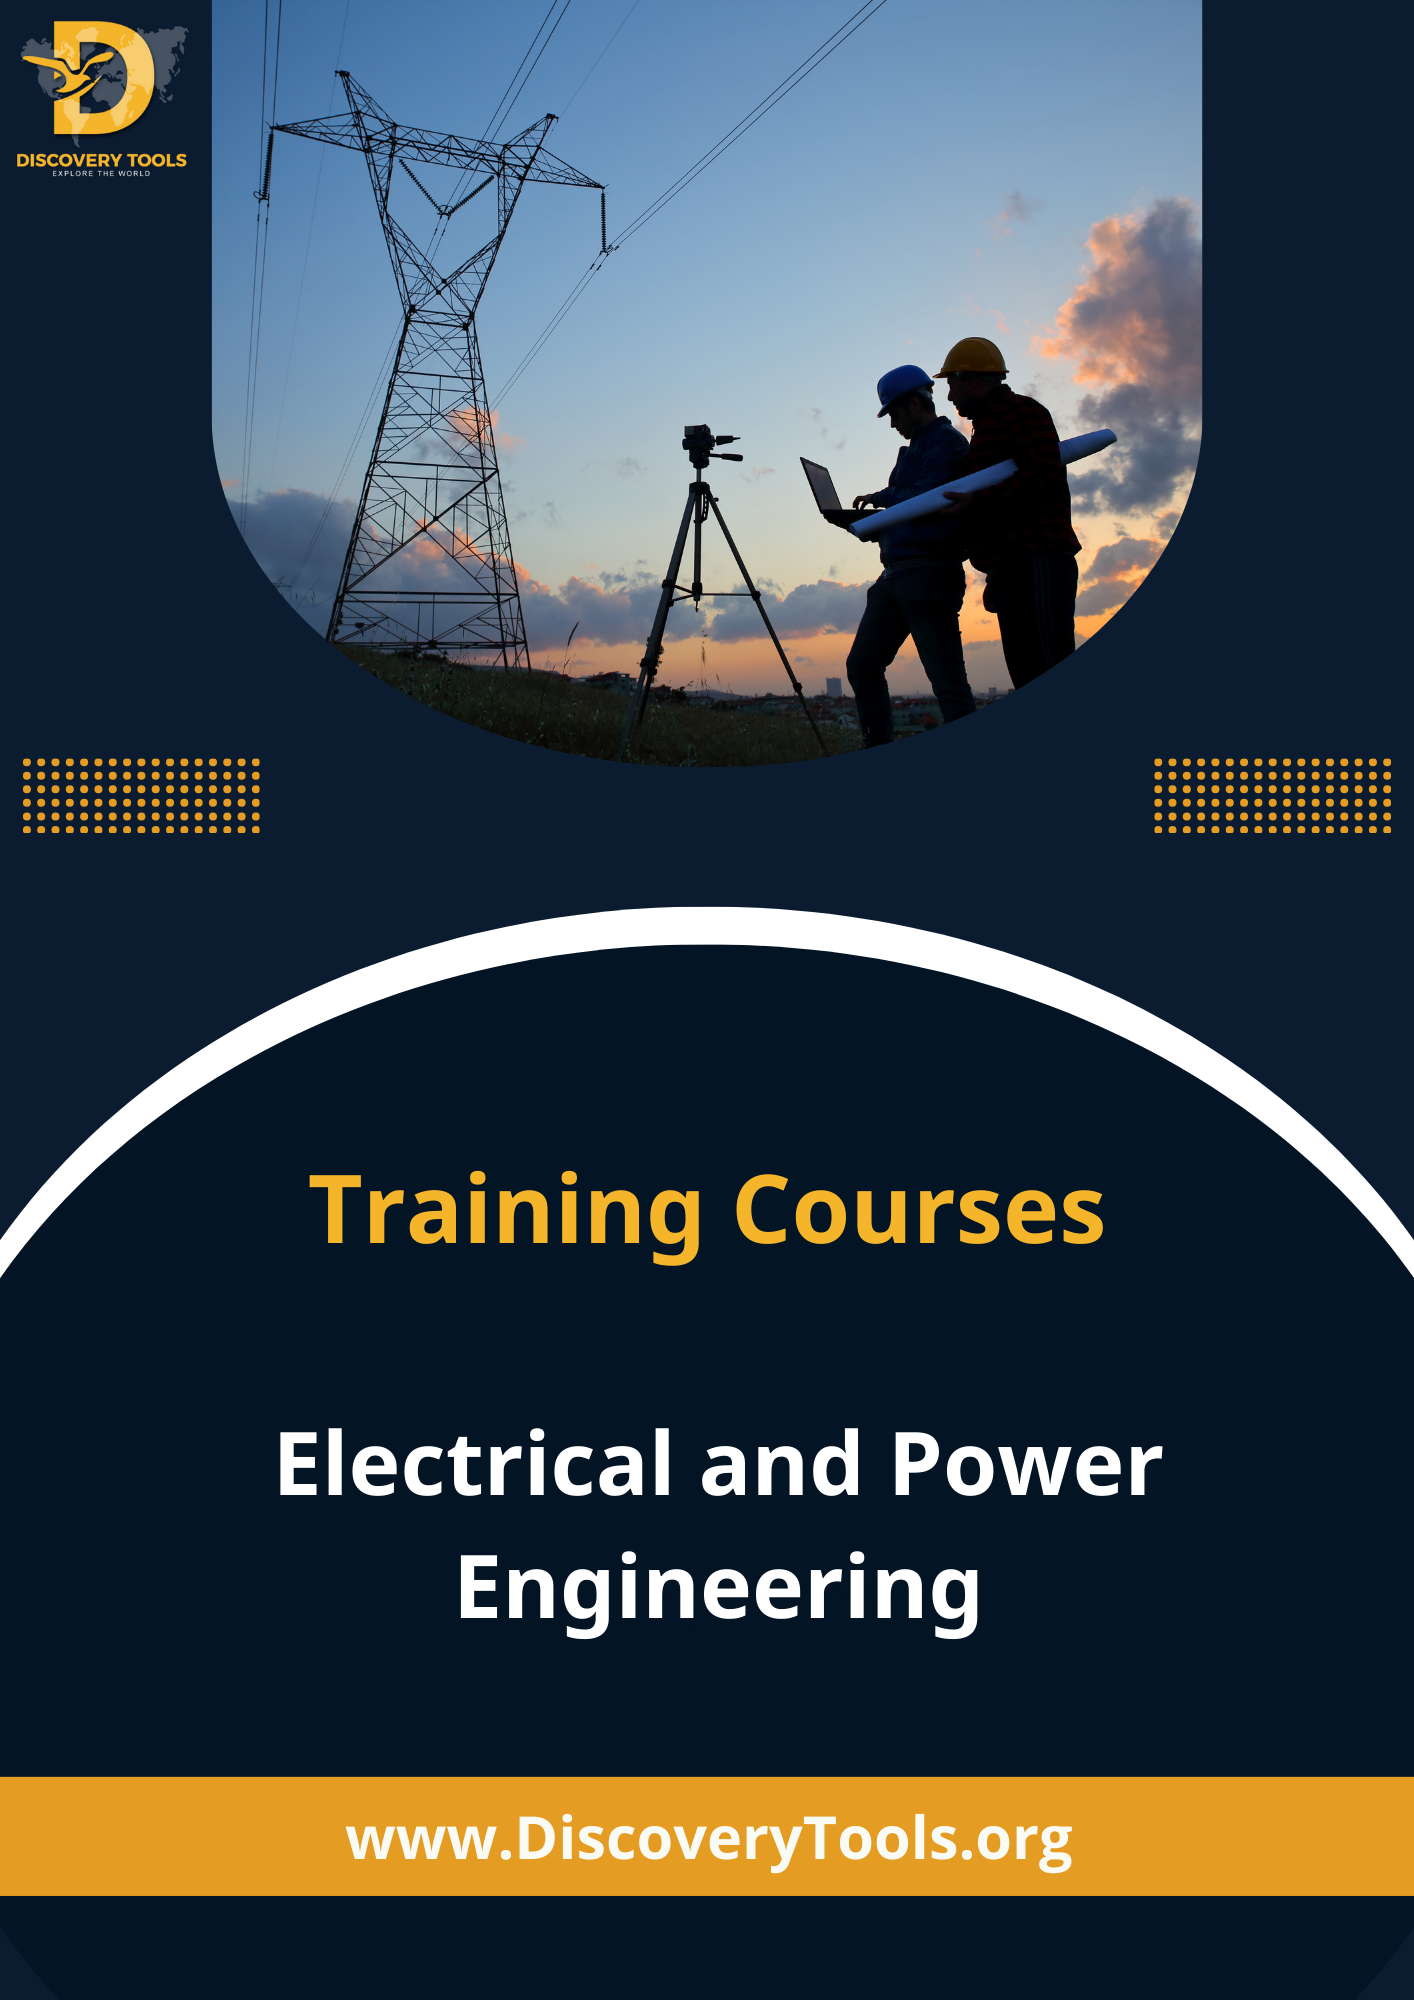 Electrical and Power Engineering